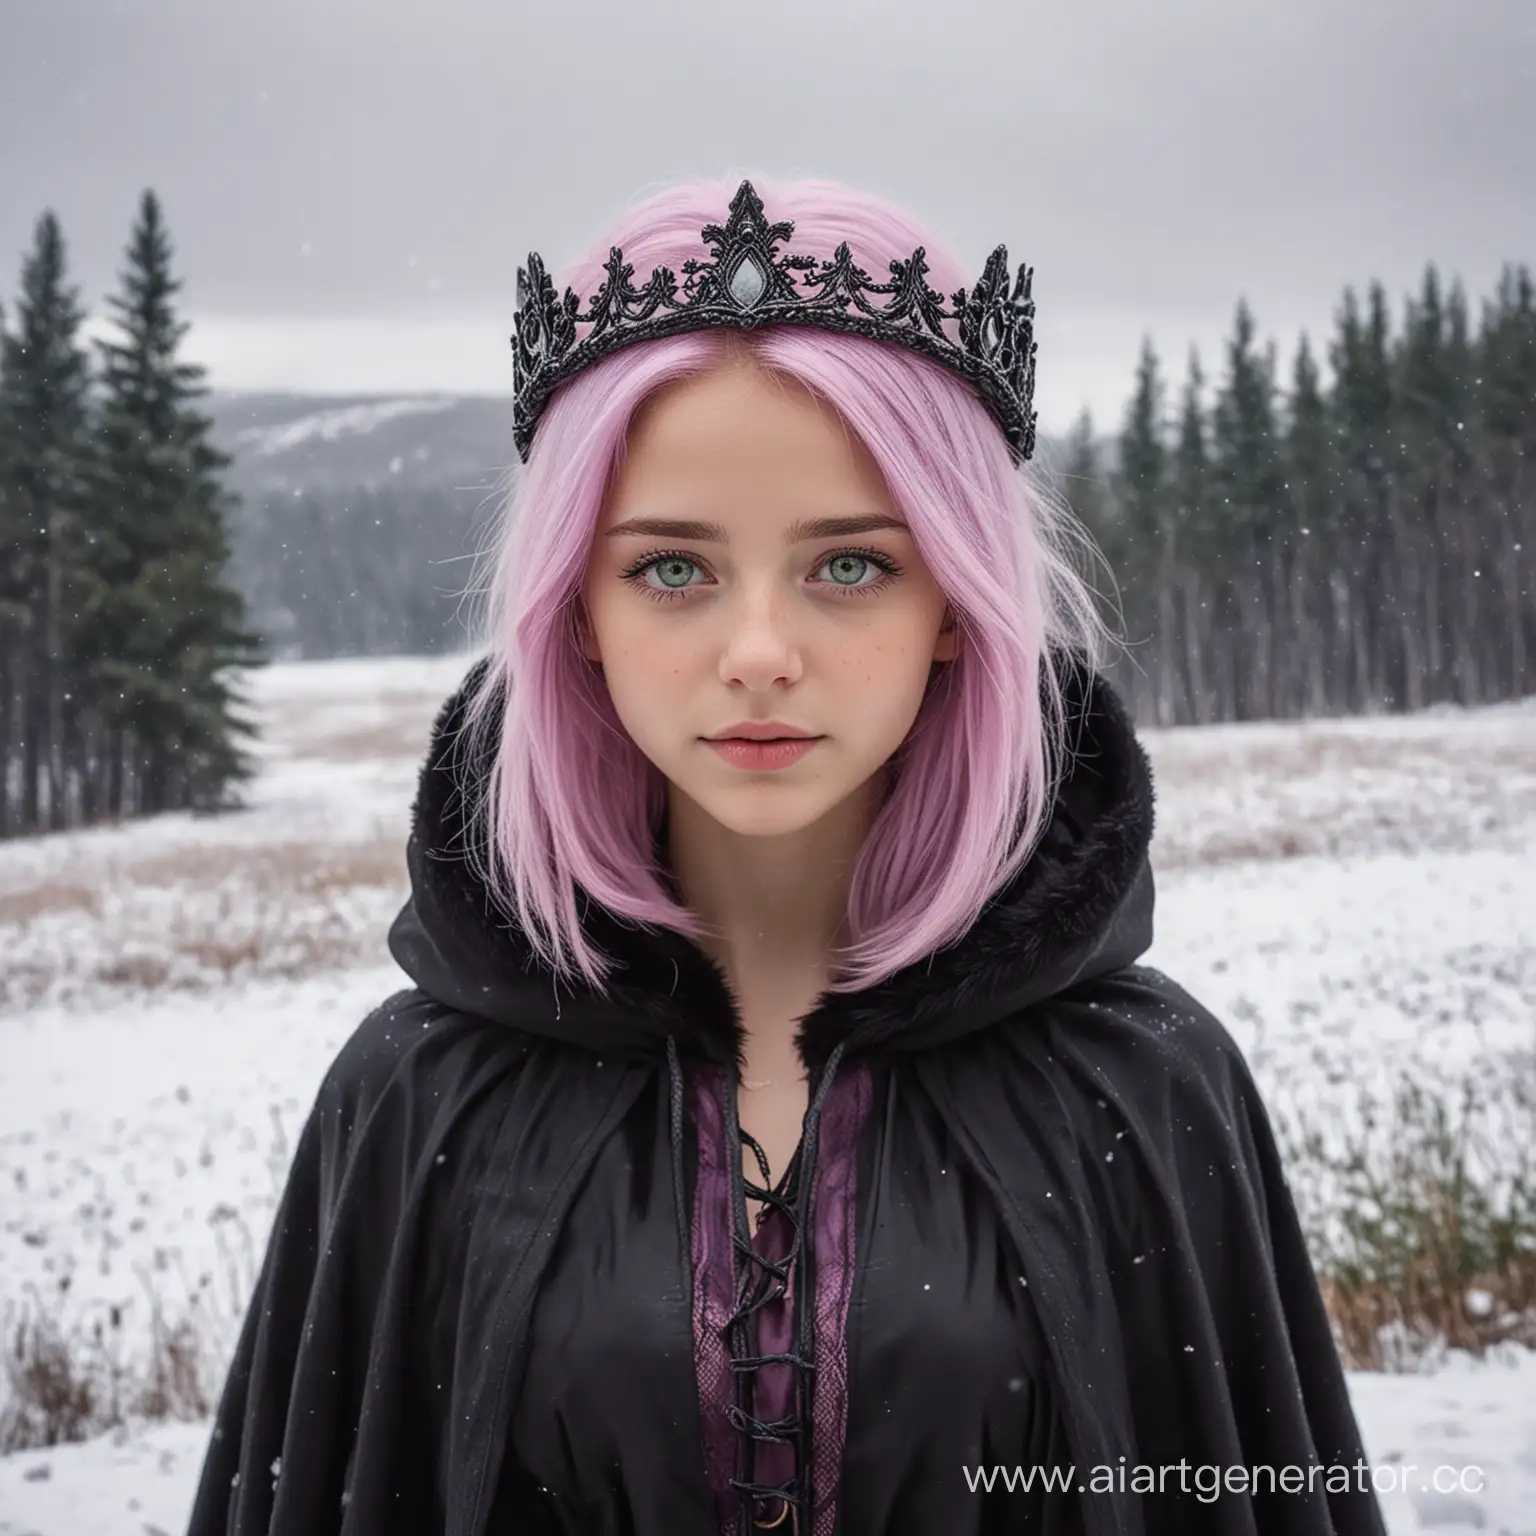 Enchanting-Girl-with-Pink-Hair-and-Violet-Crown-in-Snowy-Wilderness